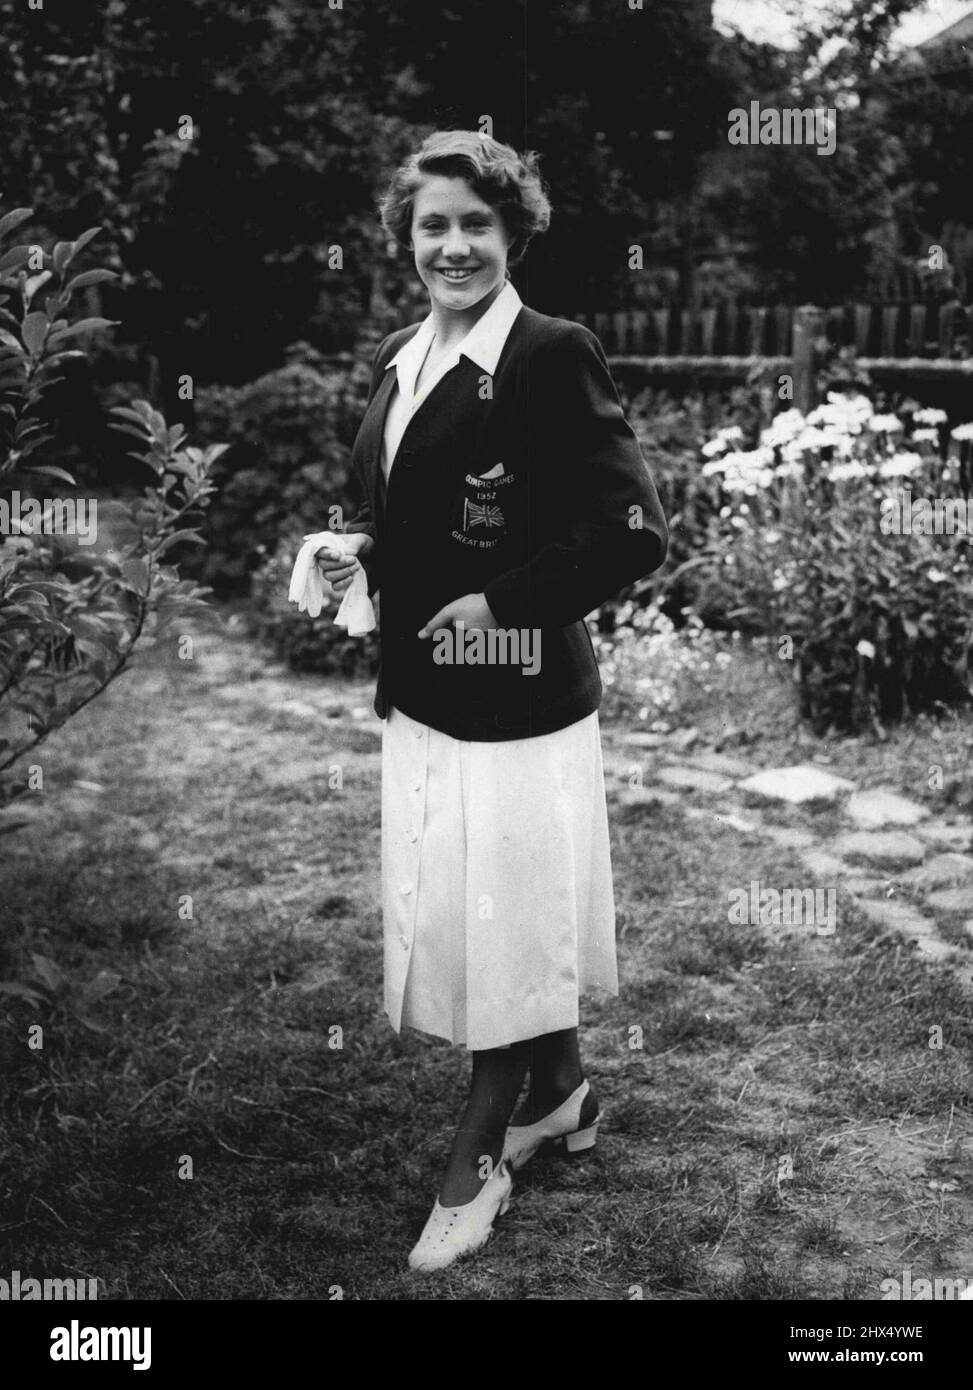 The Olympic uniform: Let the babies of the British Olympic Team, diver ***** of Liford, Essex, pictured this evening in ***** Olympic uniform which will be worn by all woman members at the Games in Helsinki. Tomorrow evening the team is being received by the Queen at Buckingham Palace. July 06, 1952. Stock Photo